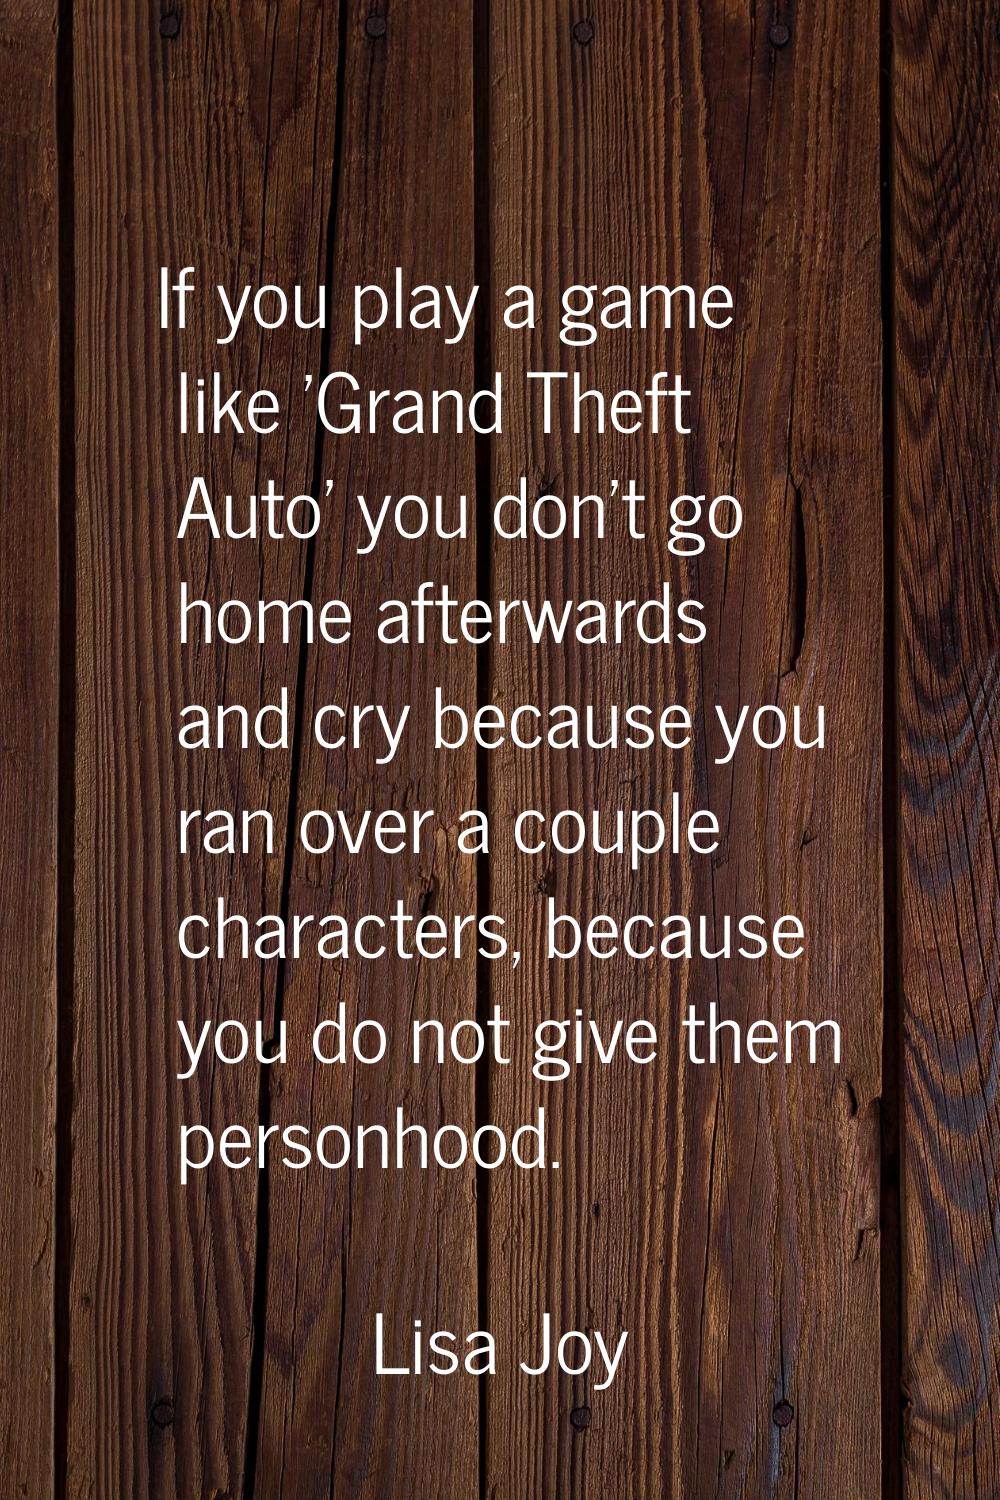 If you play a game like 'Grand Theft Auto' you don't go home afterwards and cry because you ran ove